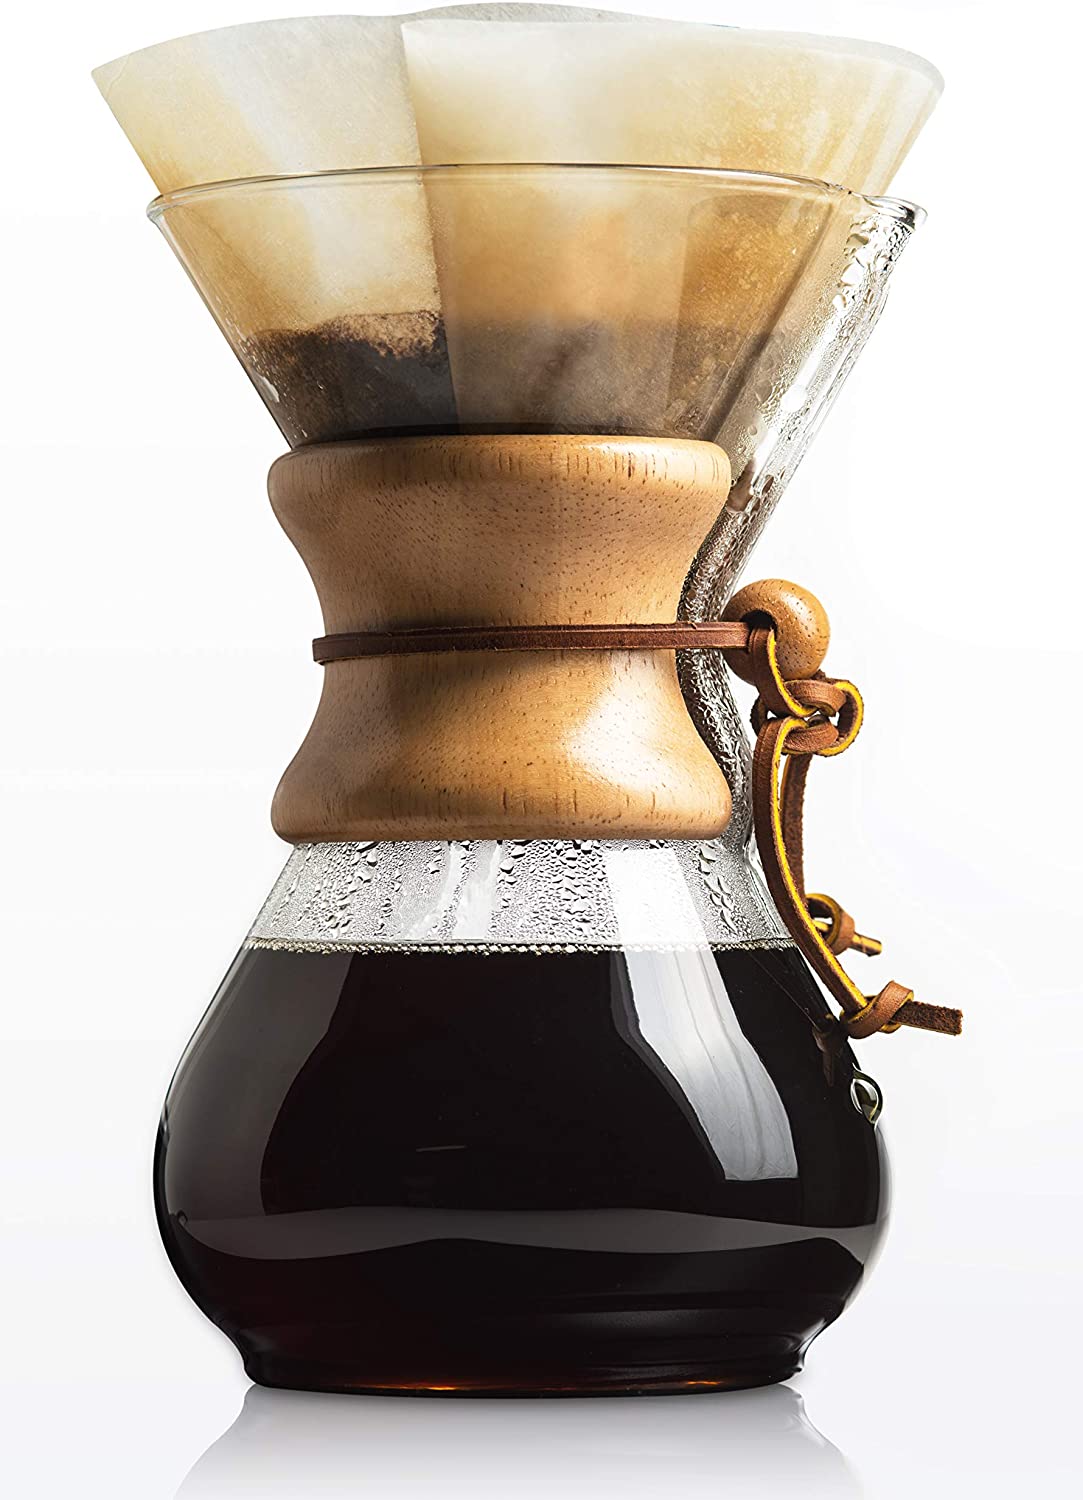 Chemex Pour-Over Glass Coffee Maker - 8 Cup